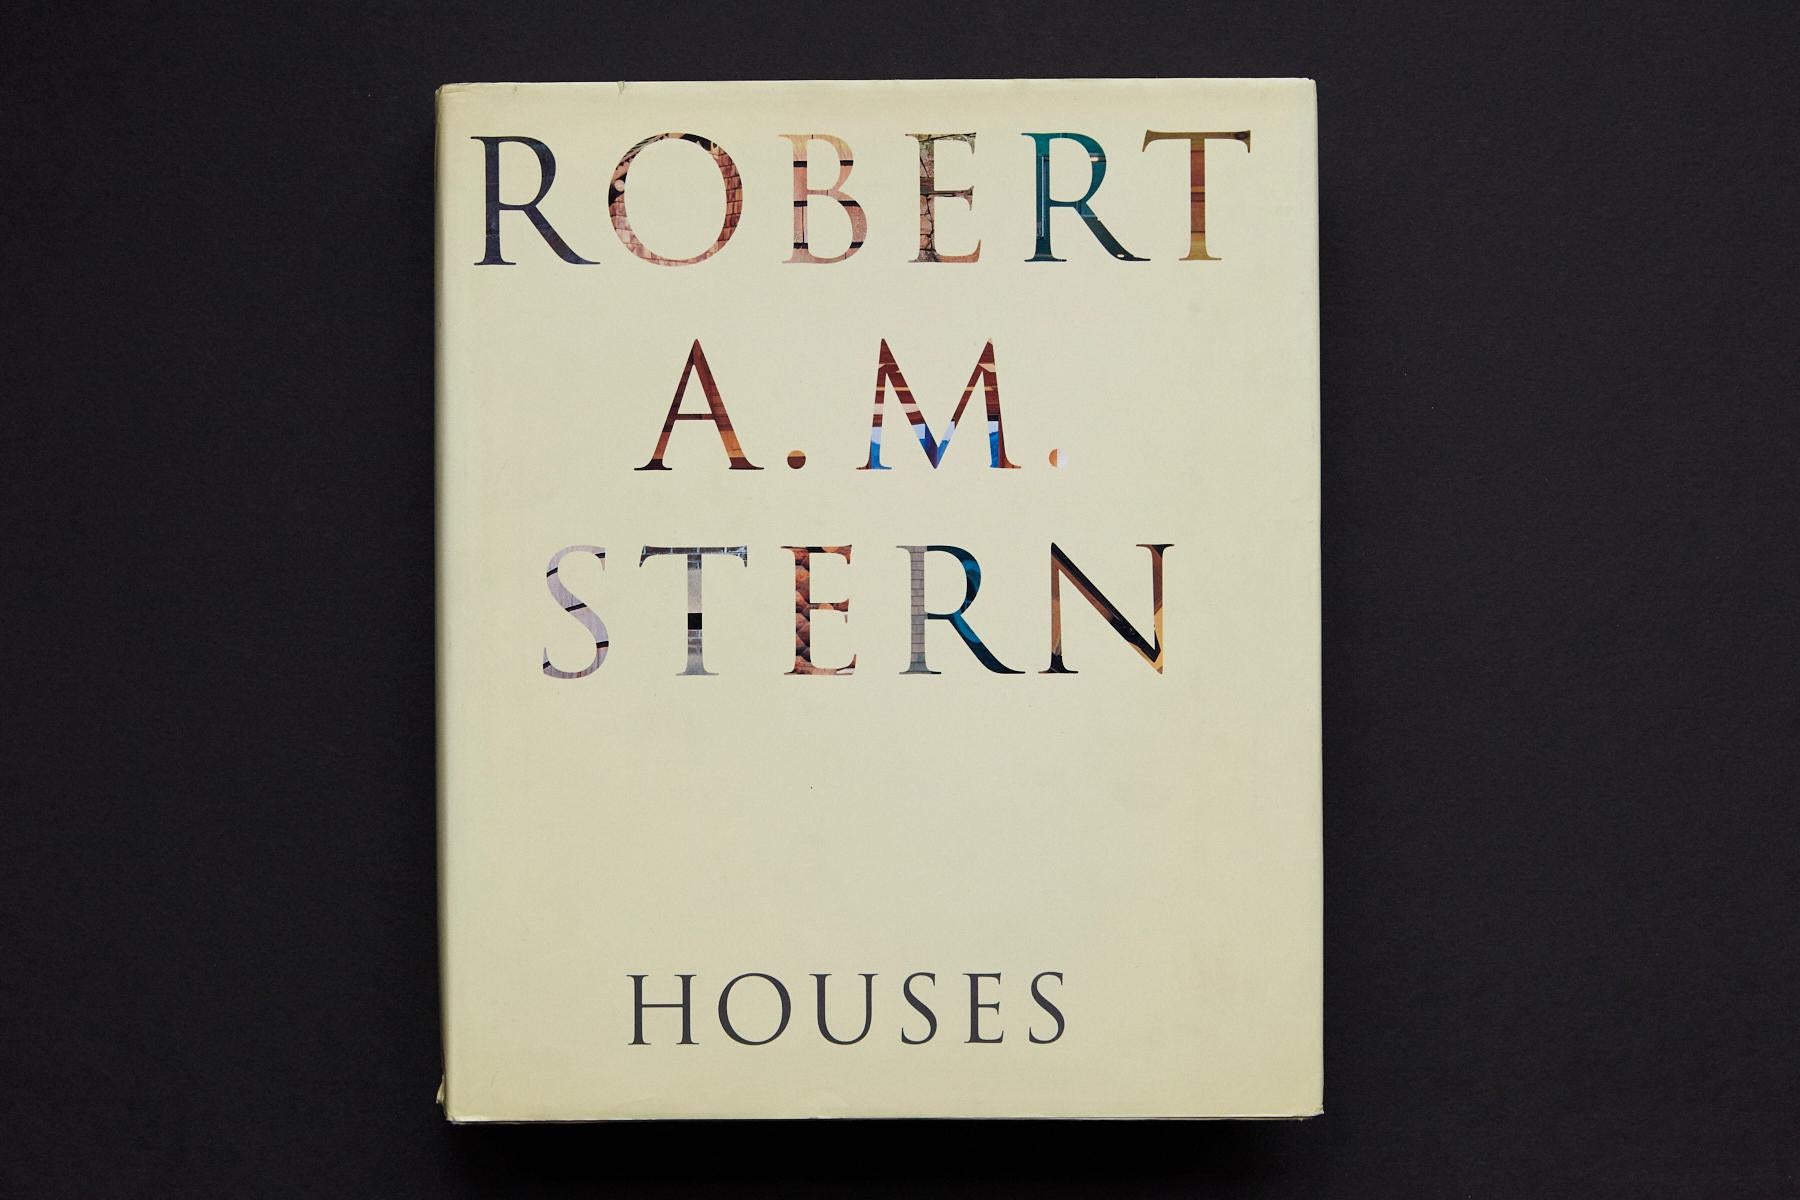 Robert A.M. Stern Houses by Robert A.M. Stern, signed by Stern underneath the half title.
Publisher - The Monacelli Press
Date published - 1997 - First Edition
Binding - Hardcover, 608 pages.
ISBN - 1-885254-68-7

Condition: The jacket has